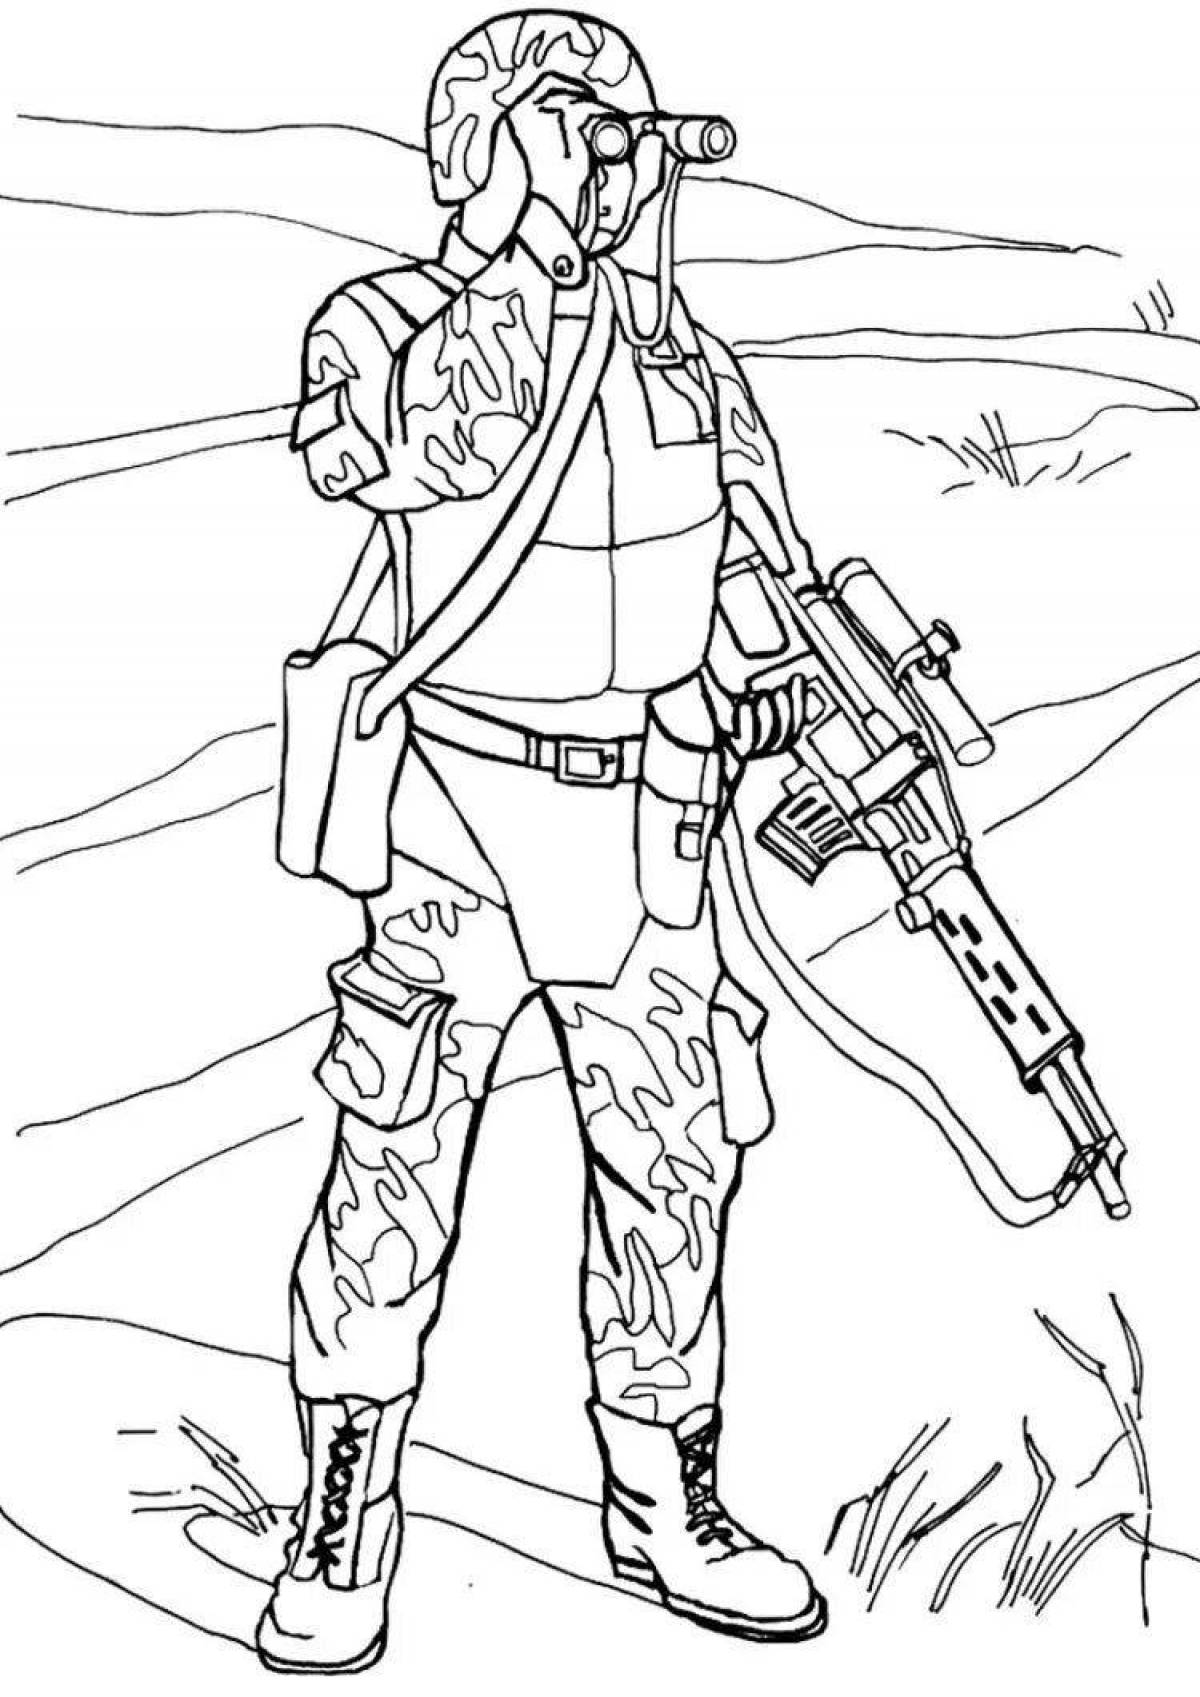 Radiant national guard coloring page